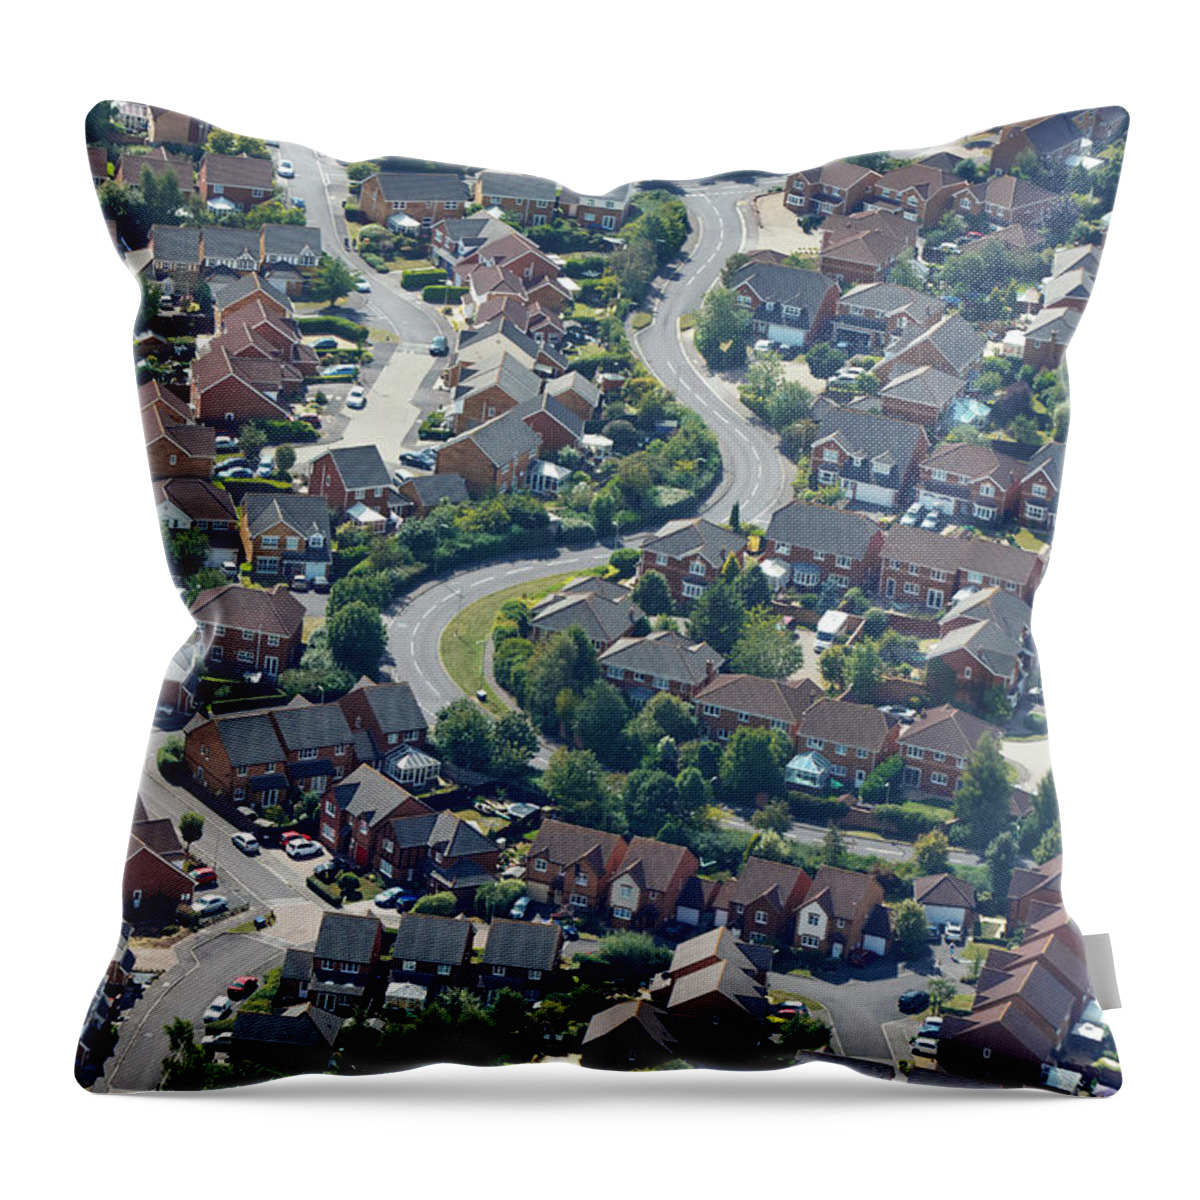 Suburb Throw Pillow featuring the photograph Aerial View Of New Housing by Allan Baxter